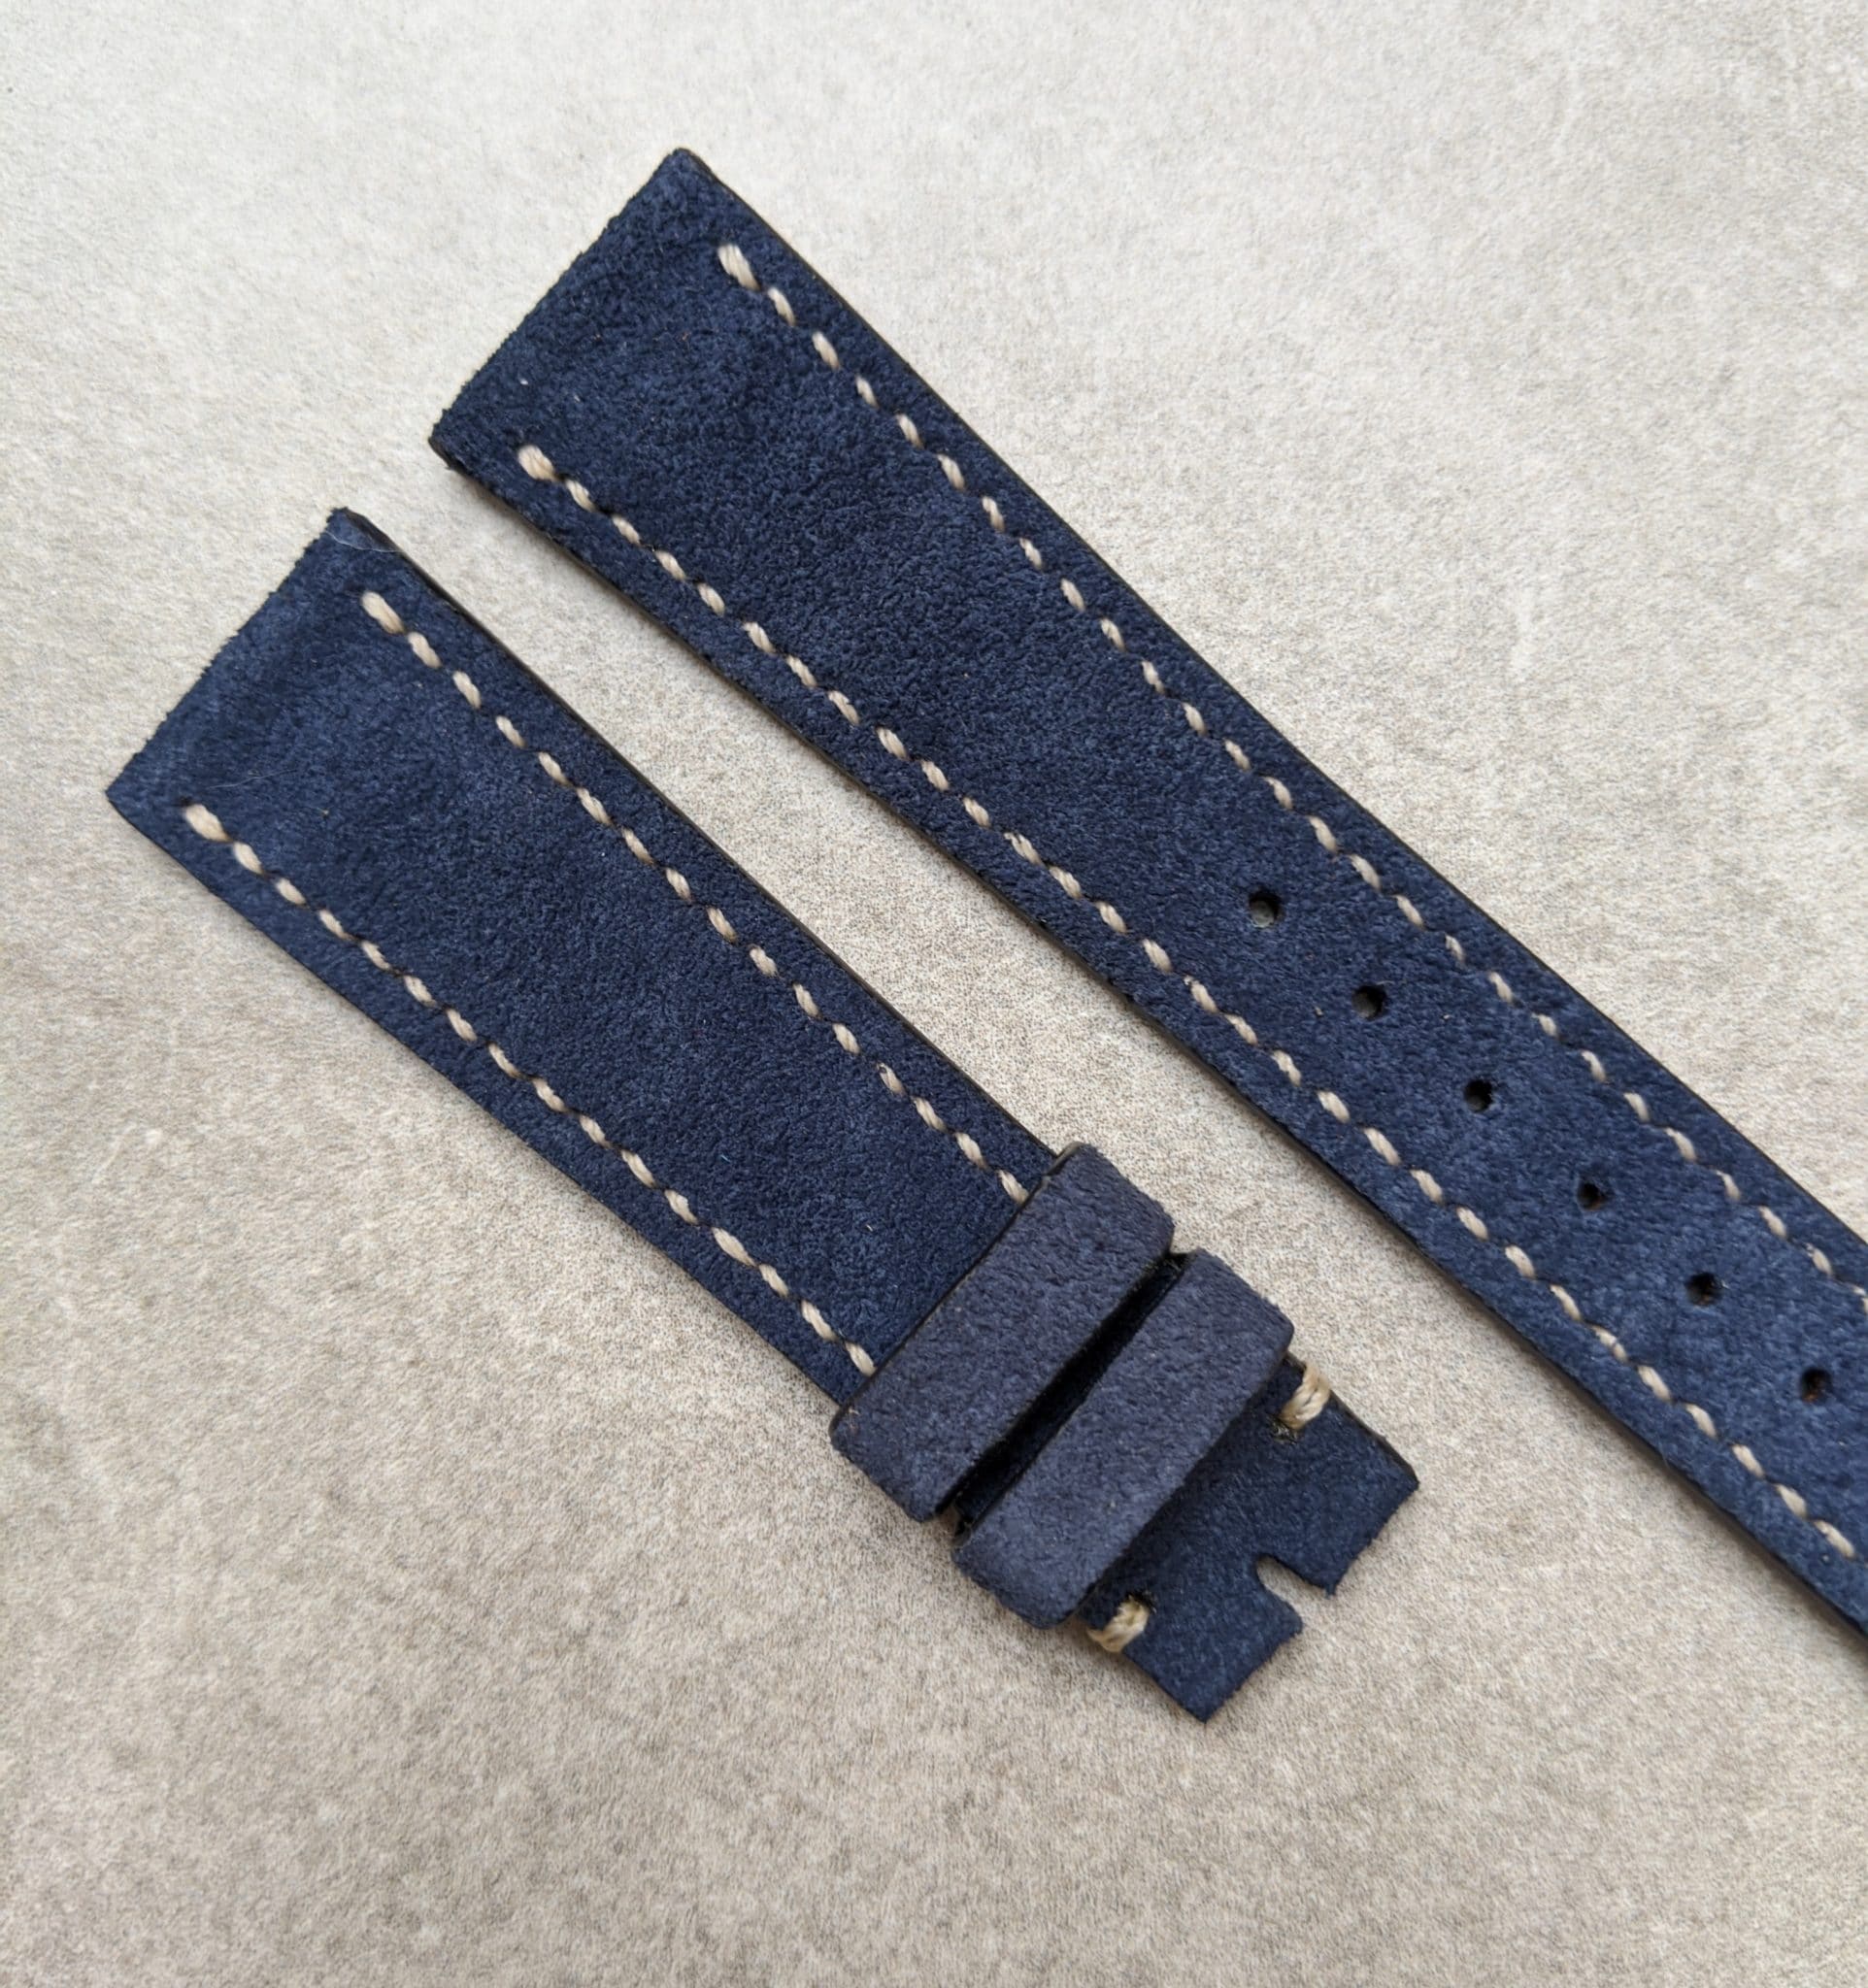 Stitched Suede Strap - Navy Blue - The Strap Tailor